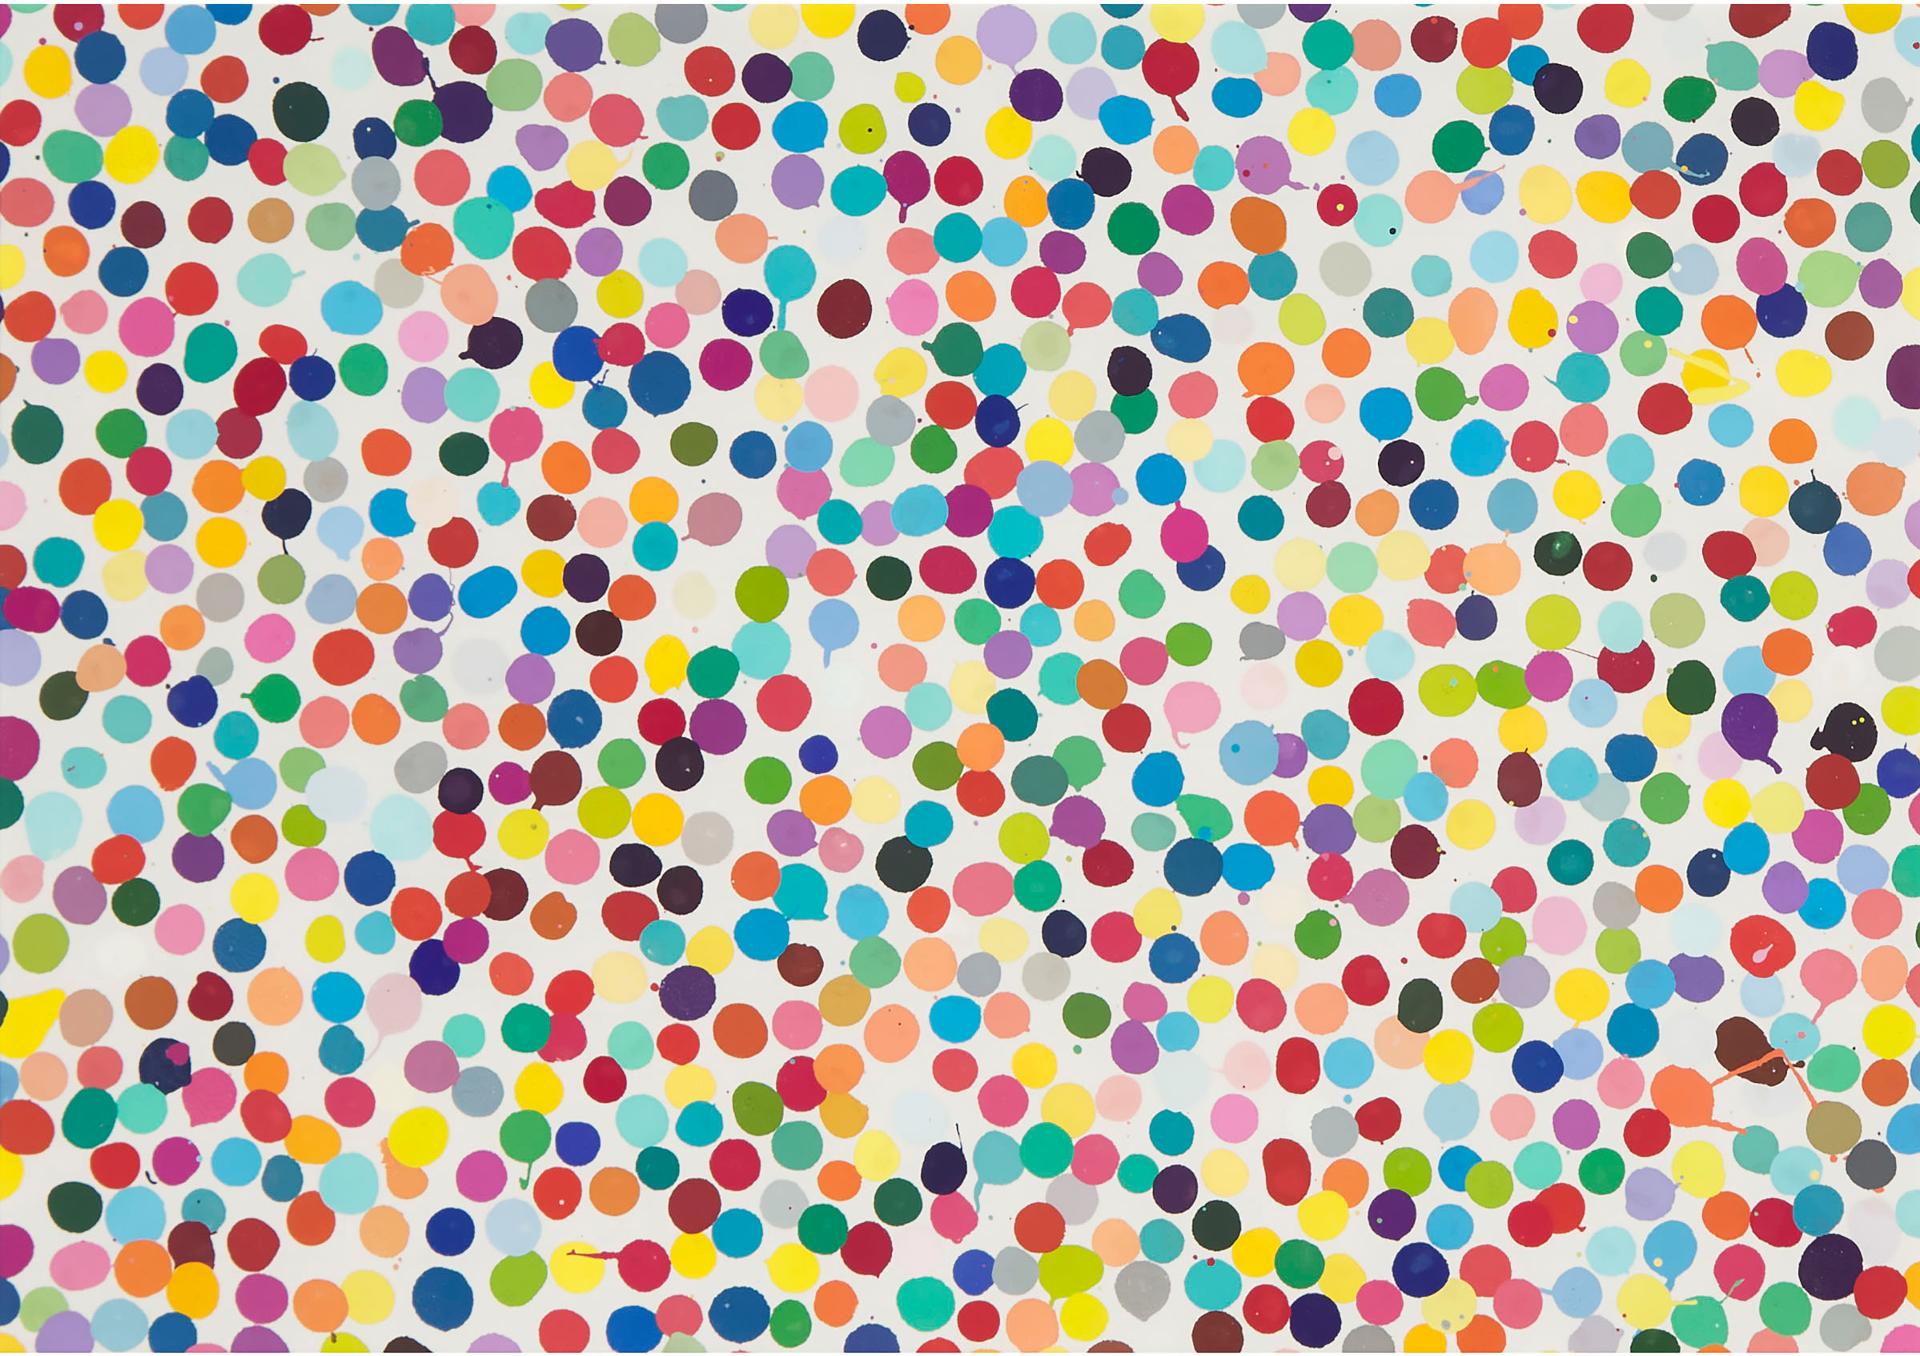 Damien Hirst (1965) - 4088, And I Died This Year, From The 